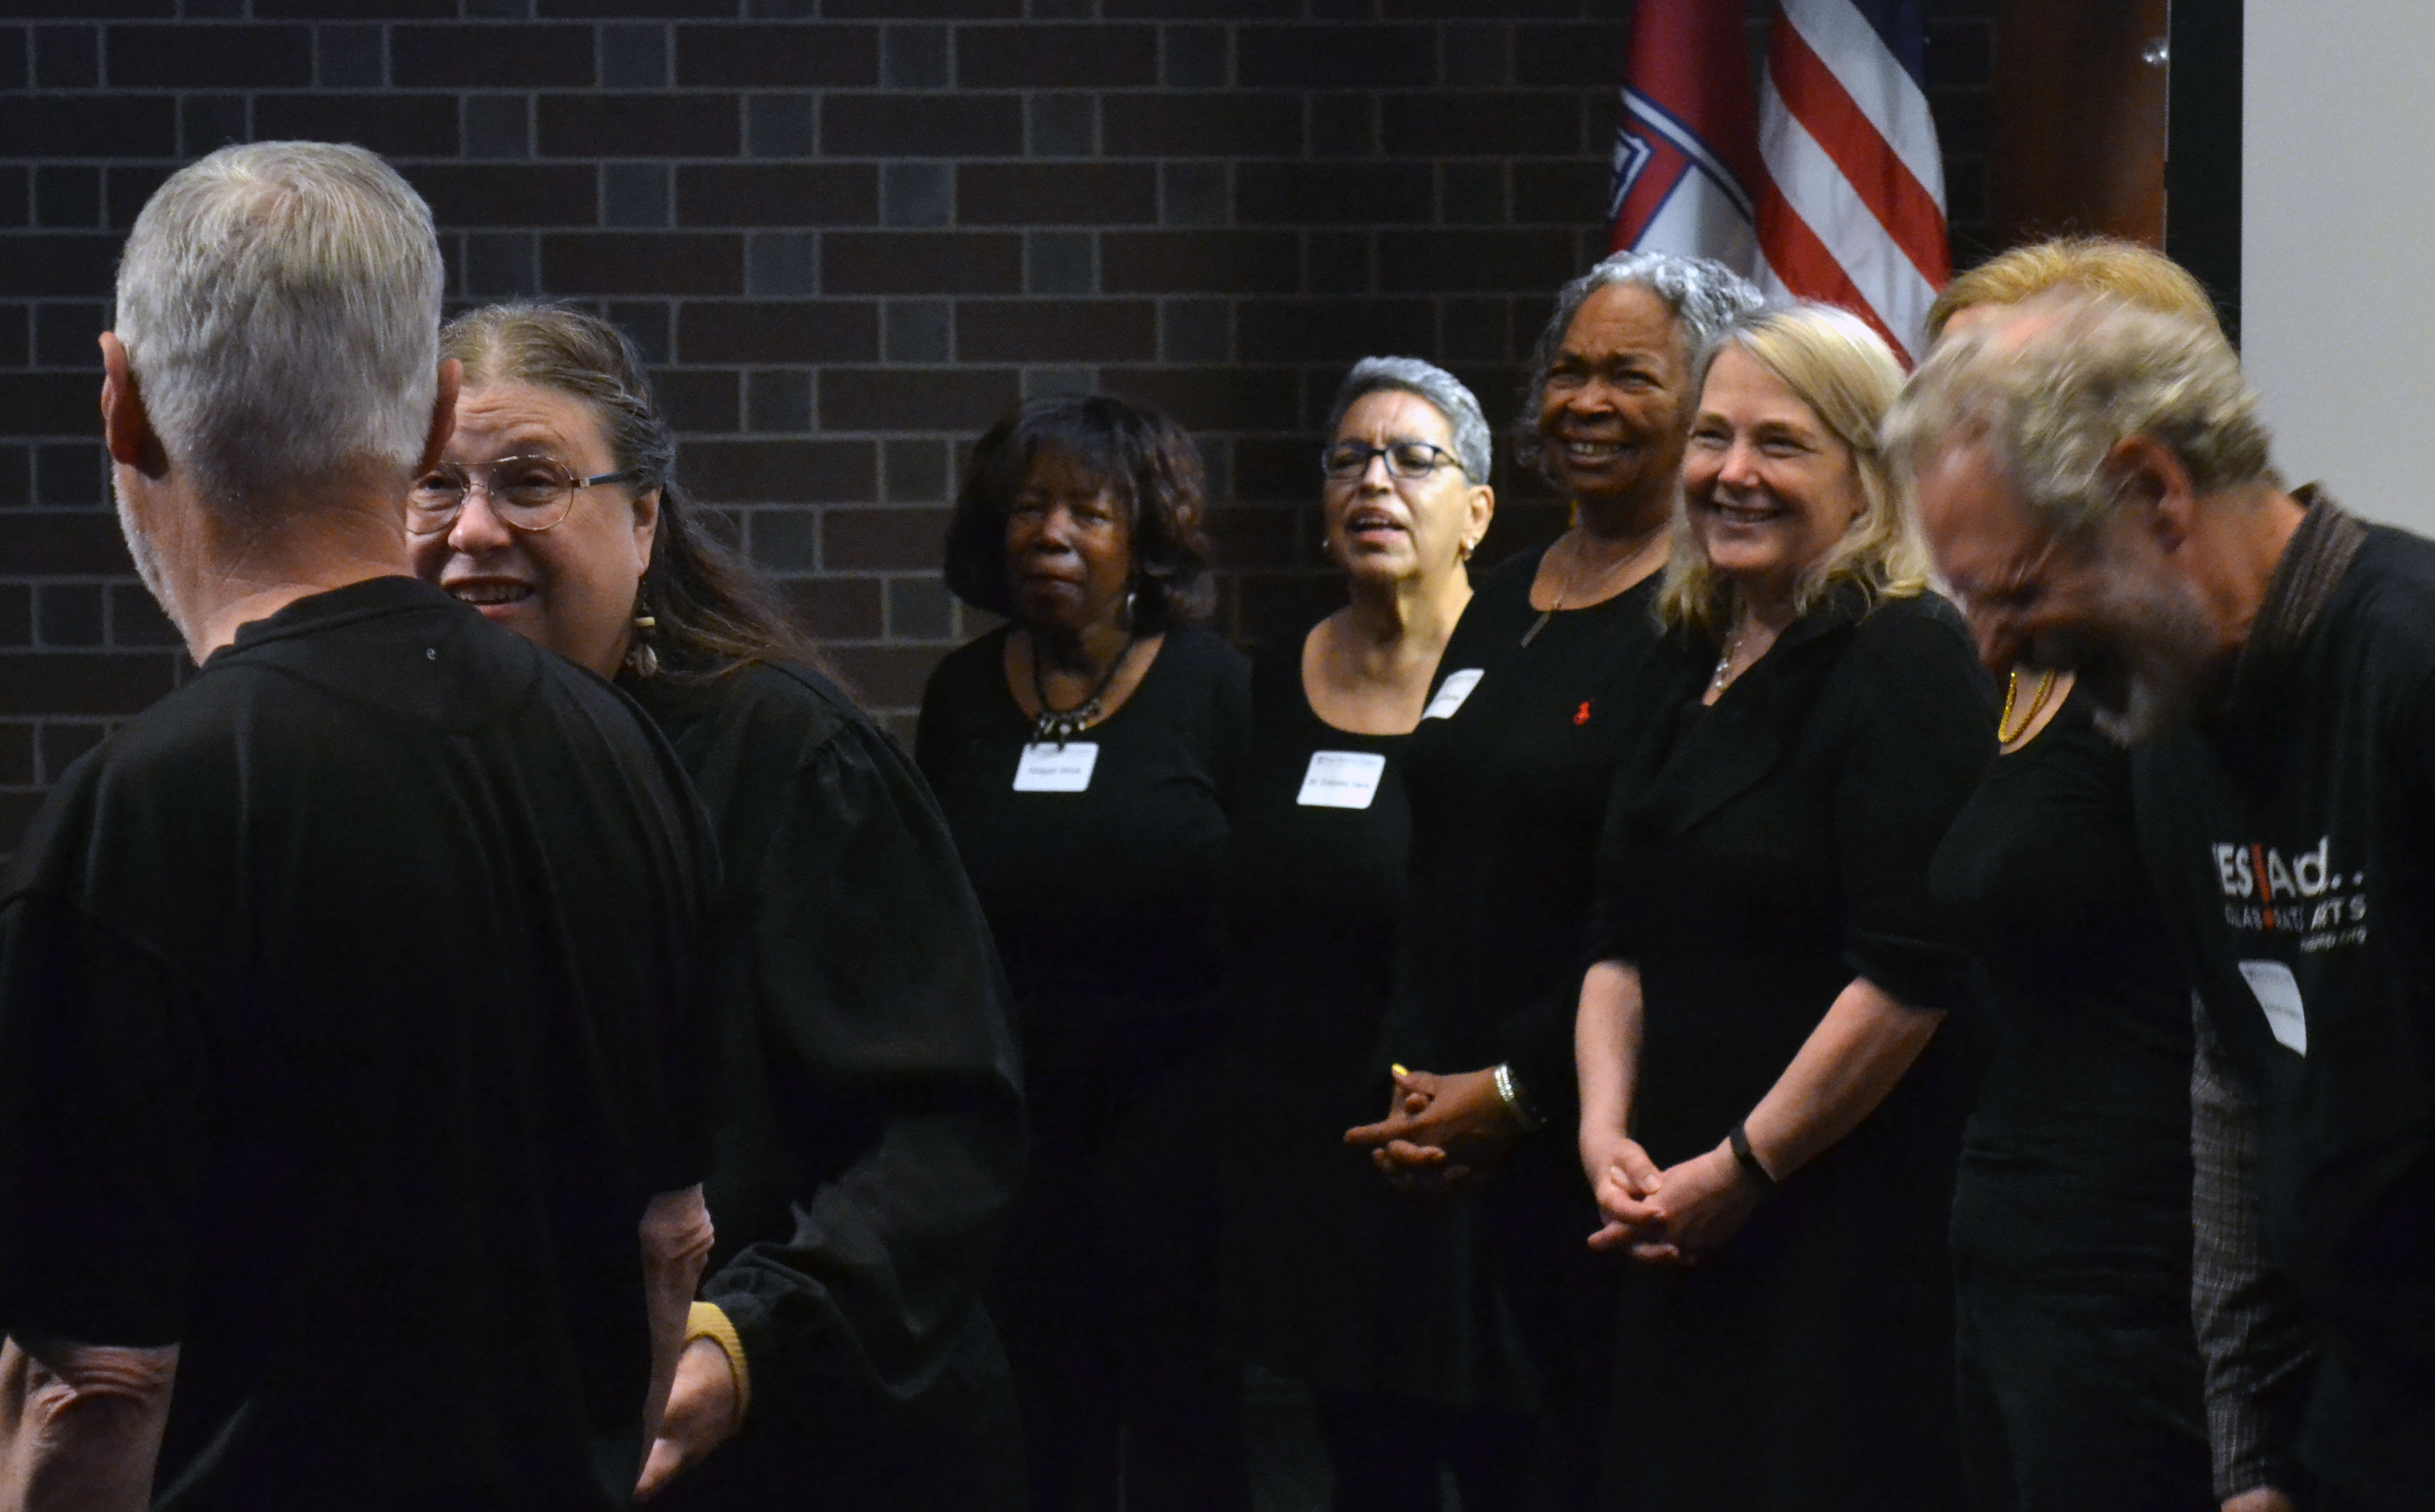 A group of people wearing all black clothing standing in a room with a brick wall and American flag in the background.